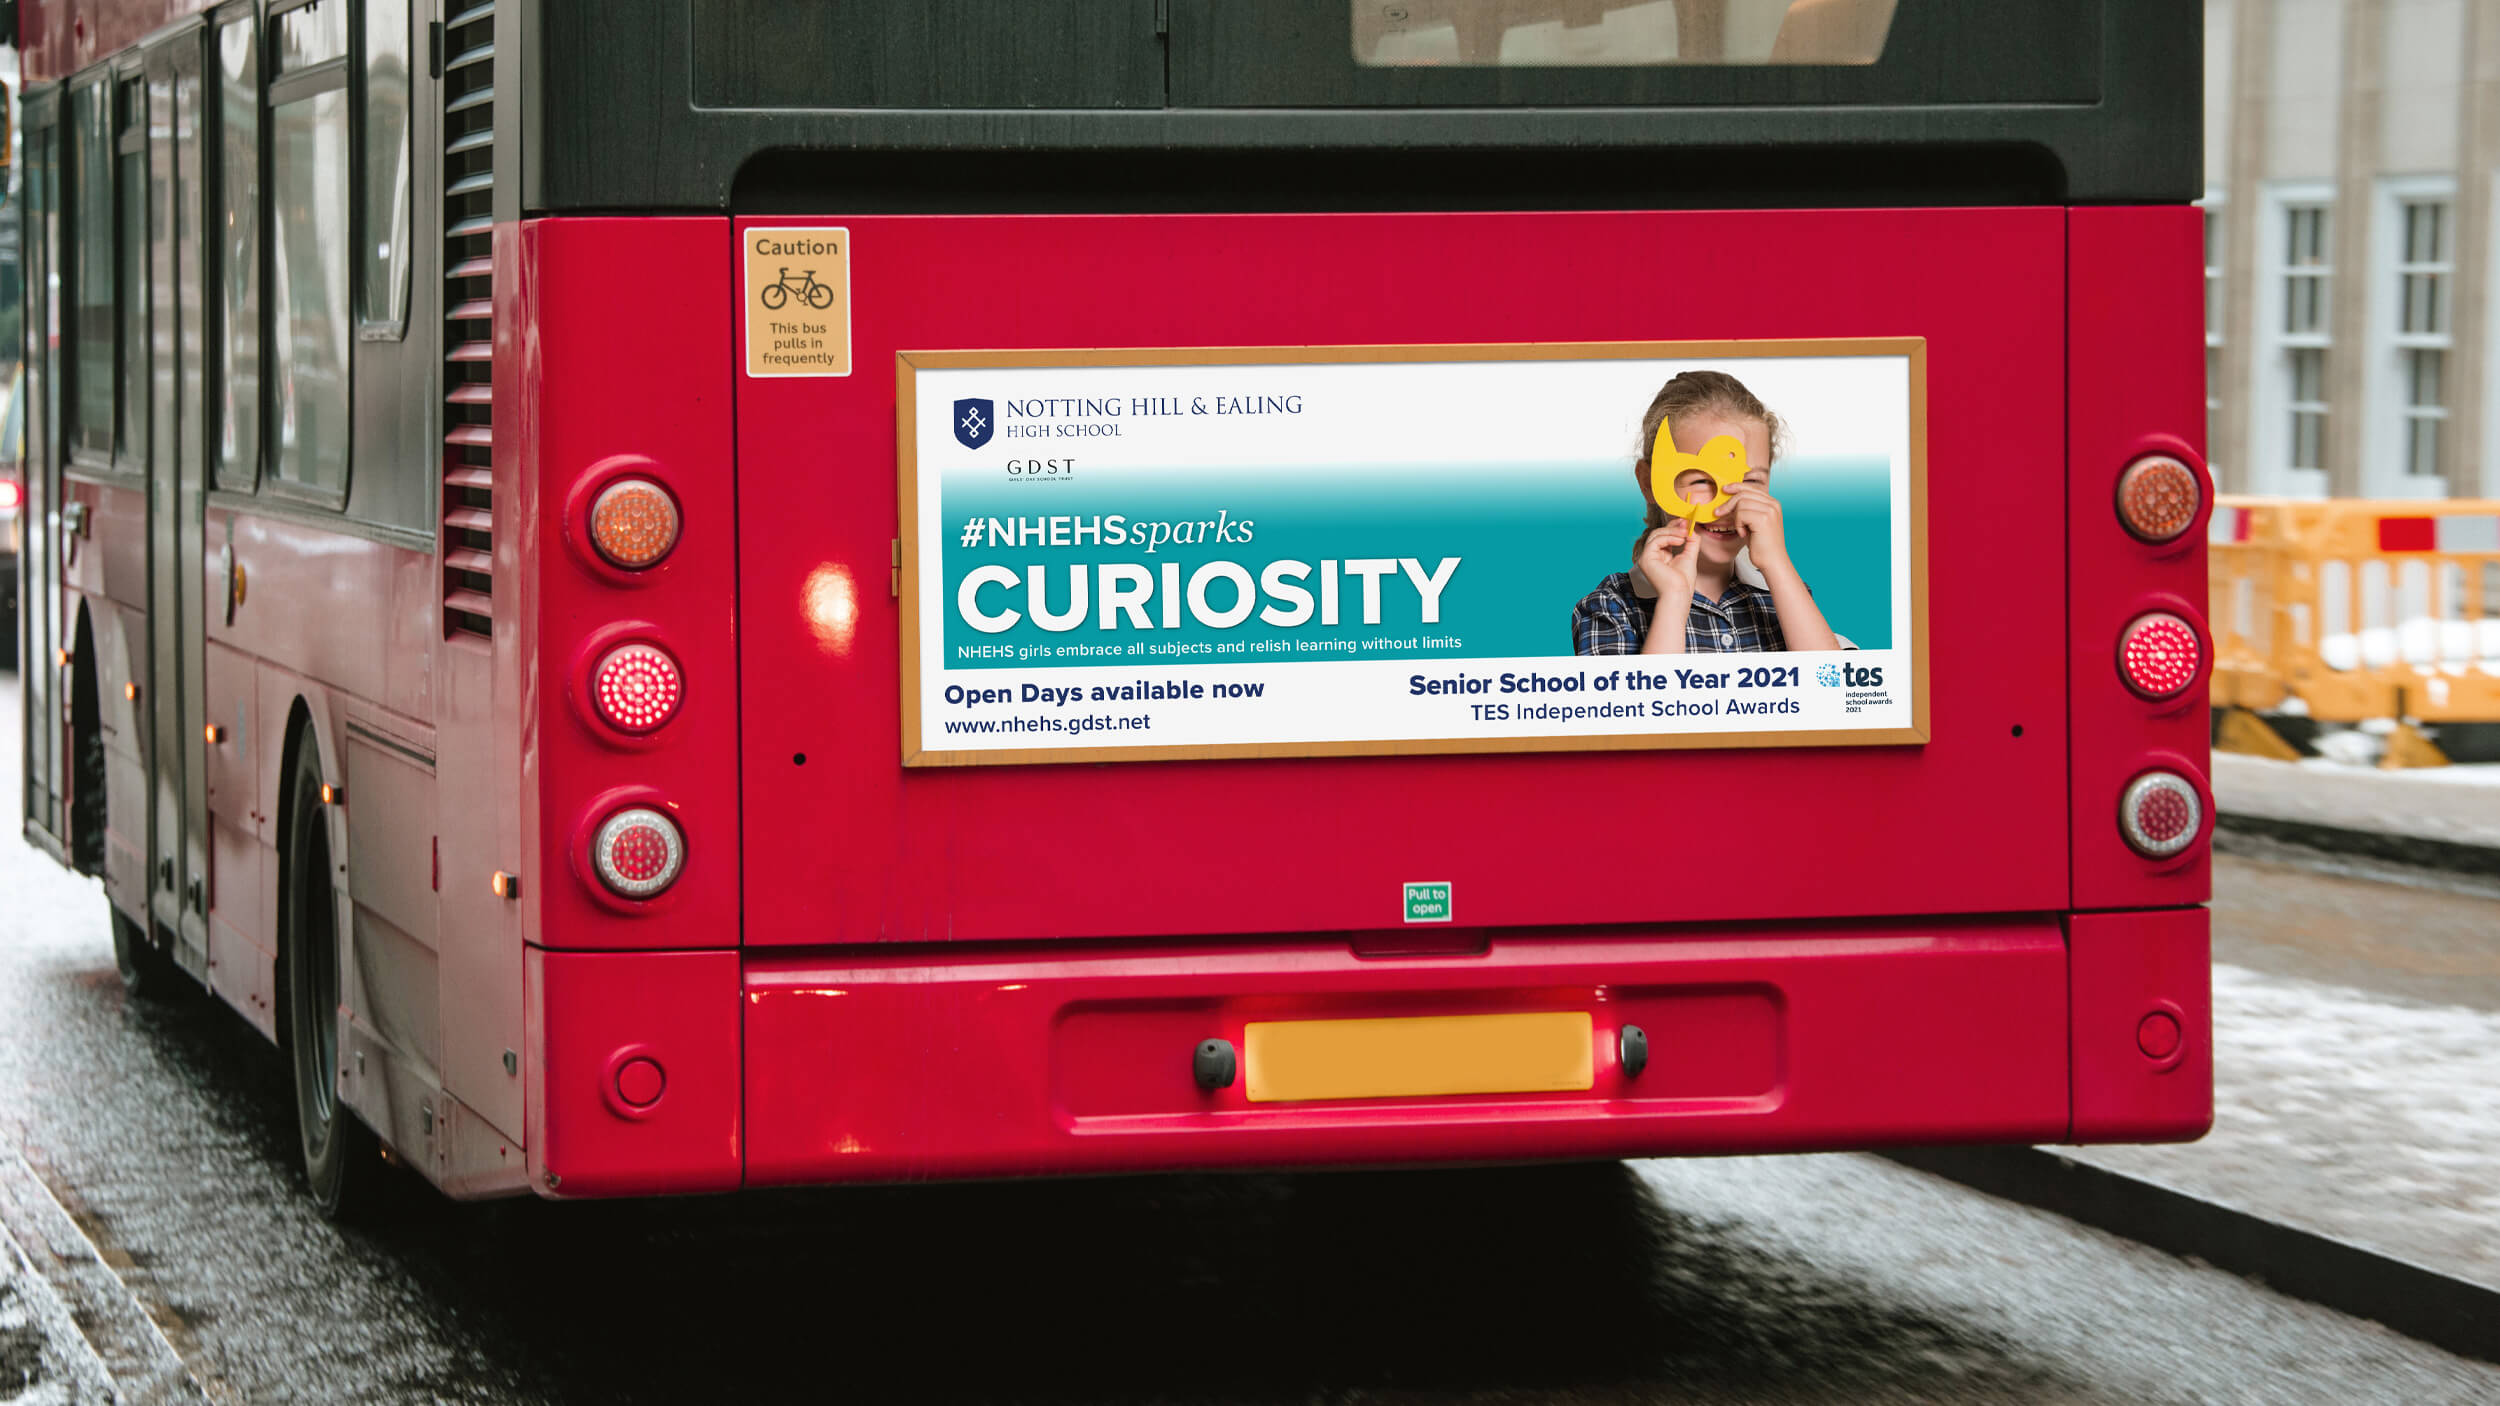 Notting Hill & Ealing High School for Girls 'Sparks Curiosity' campaign poster on a bus rear